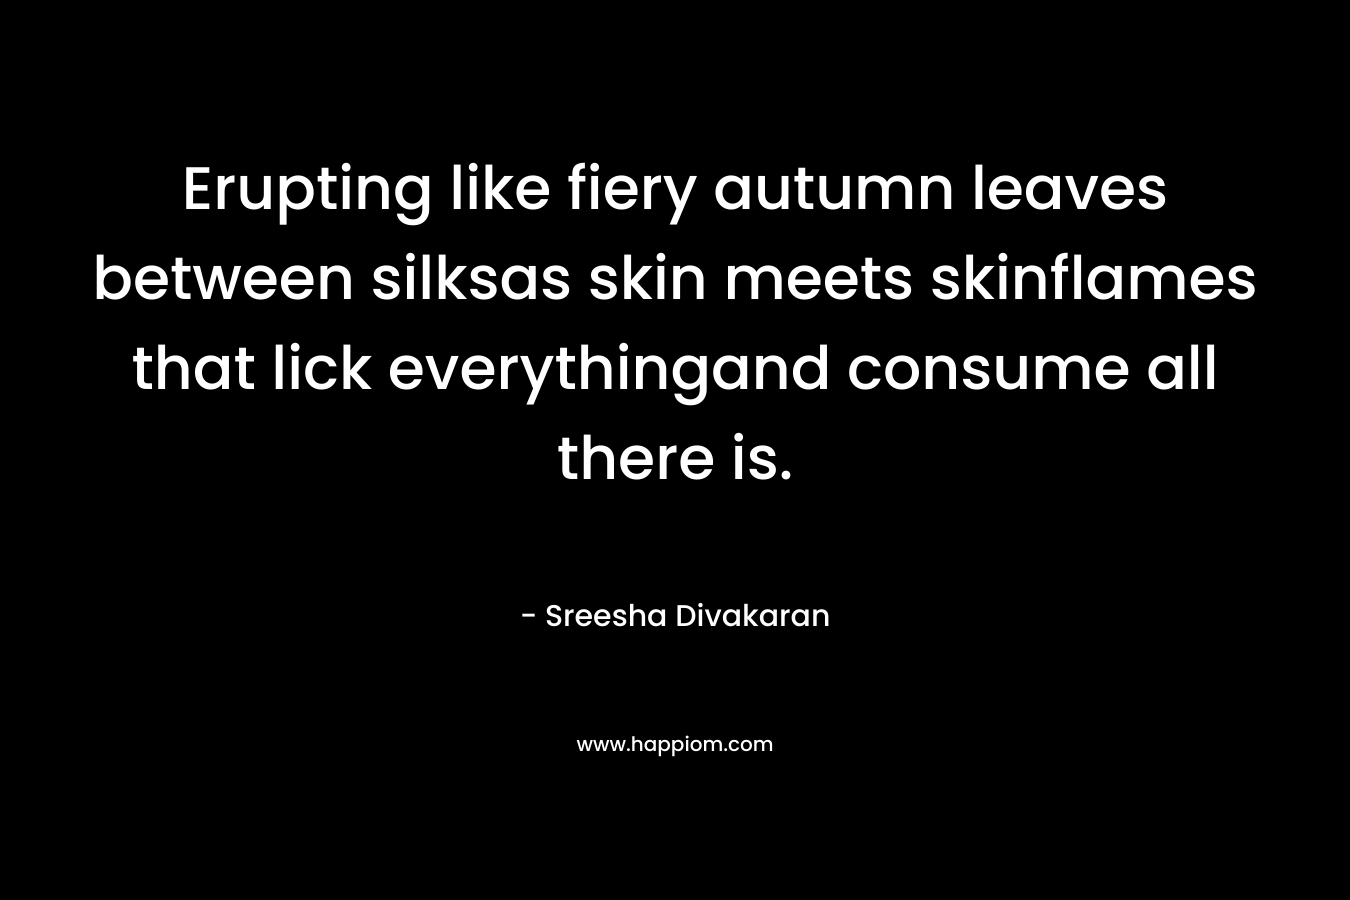 Erupting like fiery autumn leaves between silksas skin meets skinflames that lick everythingand consume all there is.